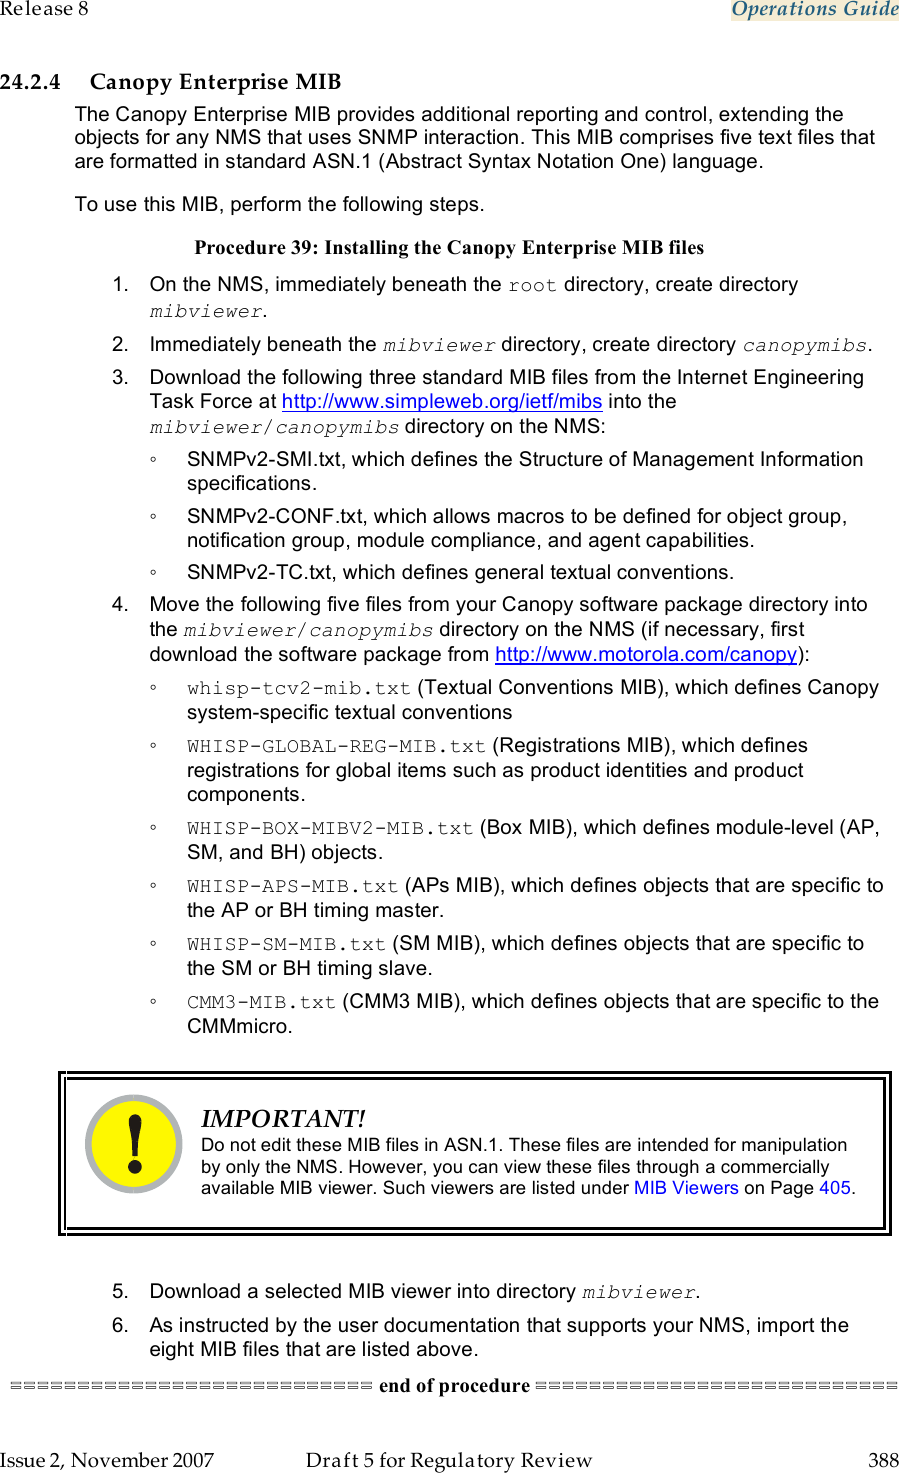 Release 8    Operations Guide   Issue 2, November 2007  Draft 5 for Regulatory Review  388     24.2.4 Canopy Enterprise MIB The Canopy Enterprise MIB provides additional reporting and control, extending the objects for any NMS that uses SNMP interaction. This MIB comprises five text files that are formatted in standard ASN.1 (Abstract Syntax Notation One) language. To use this MIB, perform the following steps. Procedure 39: Installing the Canopy Enterprise MIB files 1.  On the NMS, immediately beneath the root directory, create directory mibviewer. 2.  Immediately beneath the mibviewer directory, create directory canopymibs. 3.  Download the following three standard MIB files from the Internet Engineering Task Force at http://www.simpleweb.org/ietf/mibs into the mibviewer/canopymibs directory on the NMS:  ◦  SNMPv2-SMI.txt, which defines the Structure of Management Information specifications. ◦  SNMPv2-CONF.txt, which allows macros to be defined for object group, notification group, module compliance, and agent capabilities. ◦  SNMPv2-TC.txt, which defines general textual conventions. 4.  Move the following five files from your Canopy software package directory into the mibviewer/canopymibs directory on the NMS (if necessary, first download the software package from http://www.motorola.com/canopy): ◦ whisp-tcv2-mib.txt (Textual Conventions MIB), which defines Canopy system-specific textual conventions ◦ WHISP-GLOBAL-REG-MIB.txt (Registrations MIB), which defines registrations for global items such as product identities and product components. ◦ WHISP-BOX-MIBV2-MIB.txt (Box MIB), which defines module-level (AP, SM, and BH) objects. ◦ WHISP-APS-MIB.txt (APs MIB), which defines objects that are specific to the AP or BH timing master. ◦ WHISP-SM-MIB.txt (SM MIB), which defines objects that are specific to the SM or BH timing slave. ◦ CMM3-MIB.txt (CMM3 MIB), which defines objects that are specific to the CMMmicro.   IMPORTANT! Do not edit these MIB files in ASN.1. These files are intended for manipulation by only the NMS. However, you can view these files through a commercially available MIB viewer. Such viewers are listed under MIB Viewers on Page 405.  5.  Download a selected MIB viewer into directory mibviewer. 6.  As instructed by the user documentation that supports your NMS, import the eight MIB files that are listed above. =========================== end of procedure =========================== 